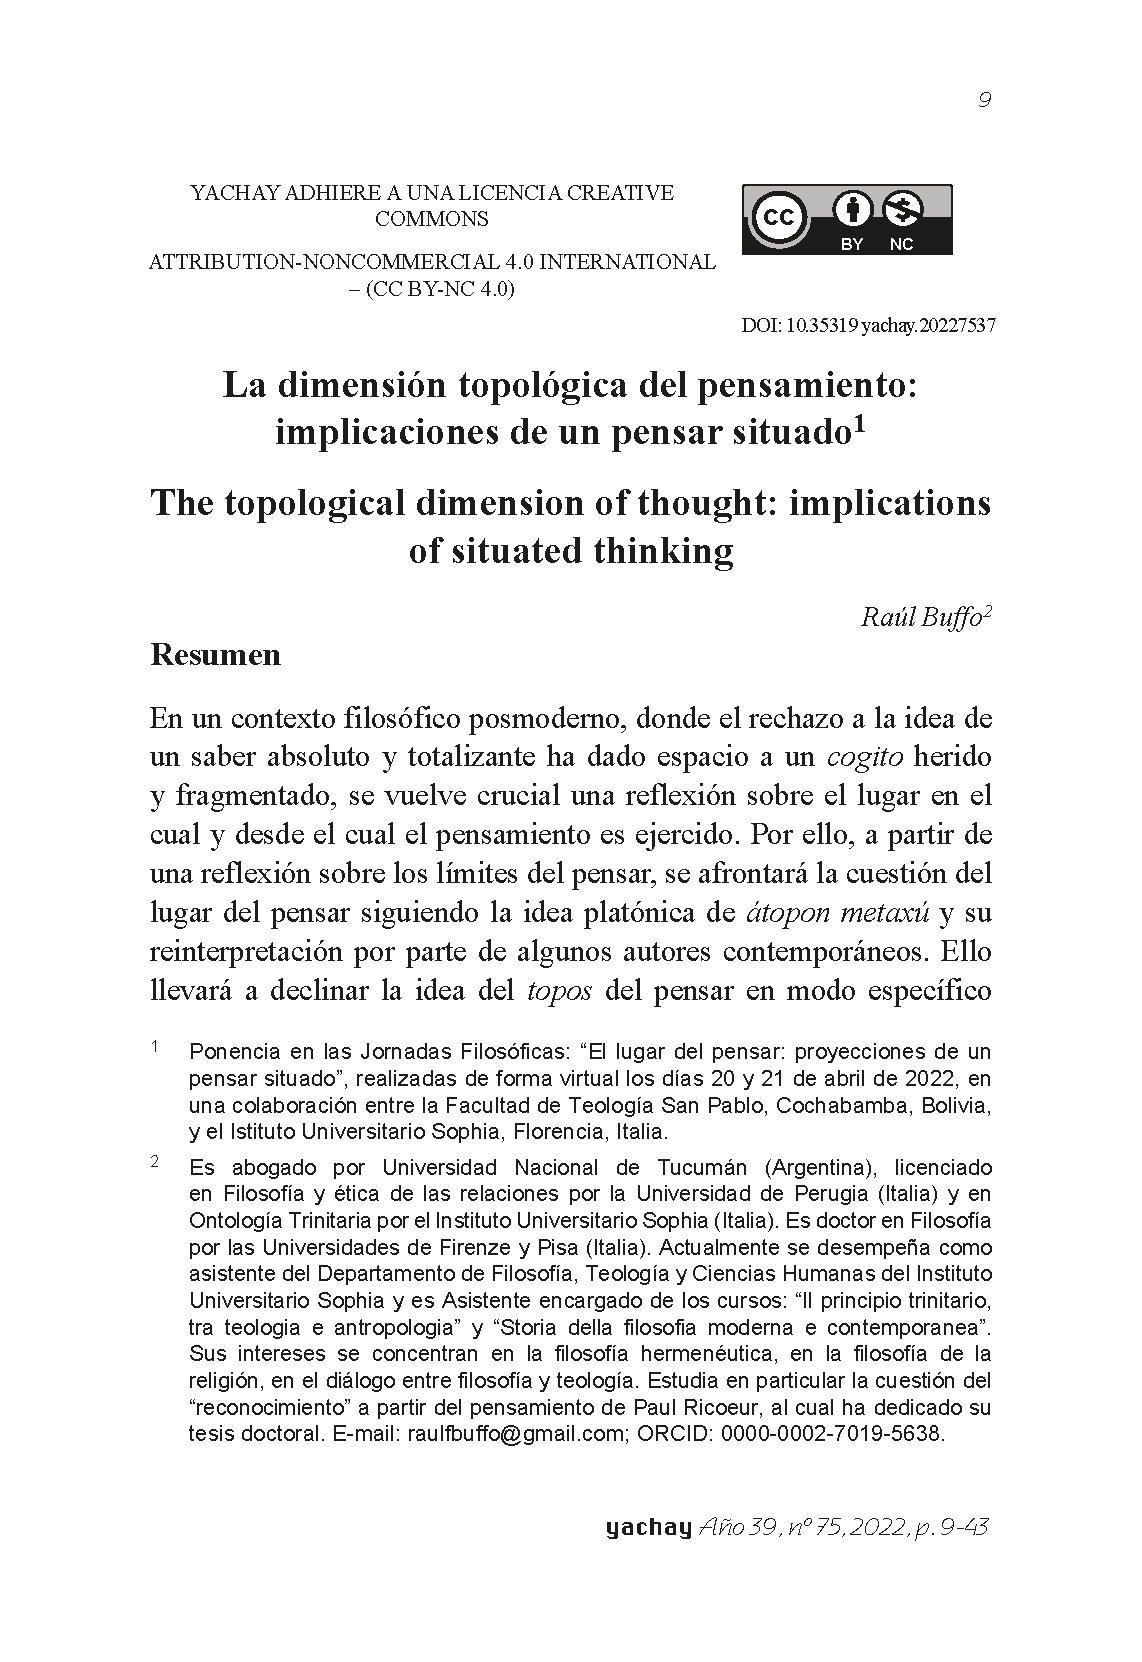 The topological dimension of thought: implications of situated thinking